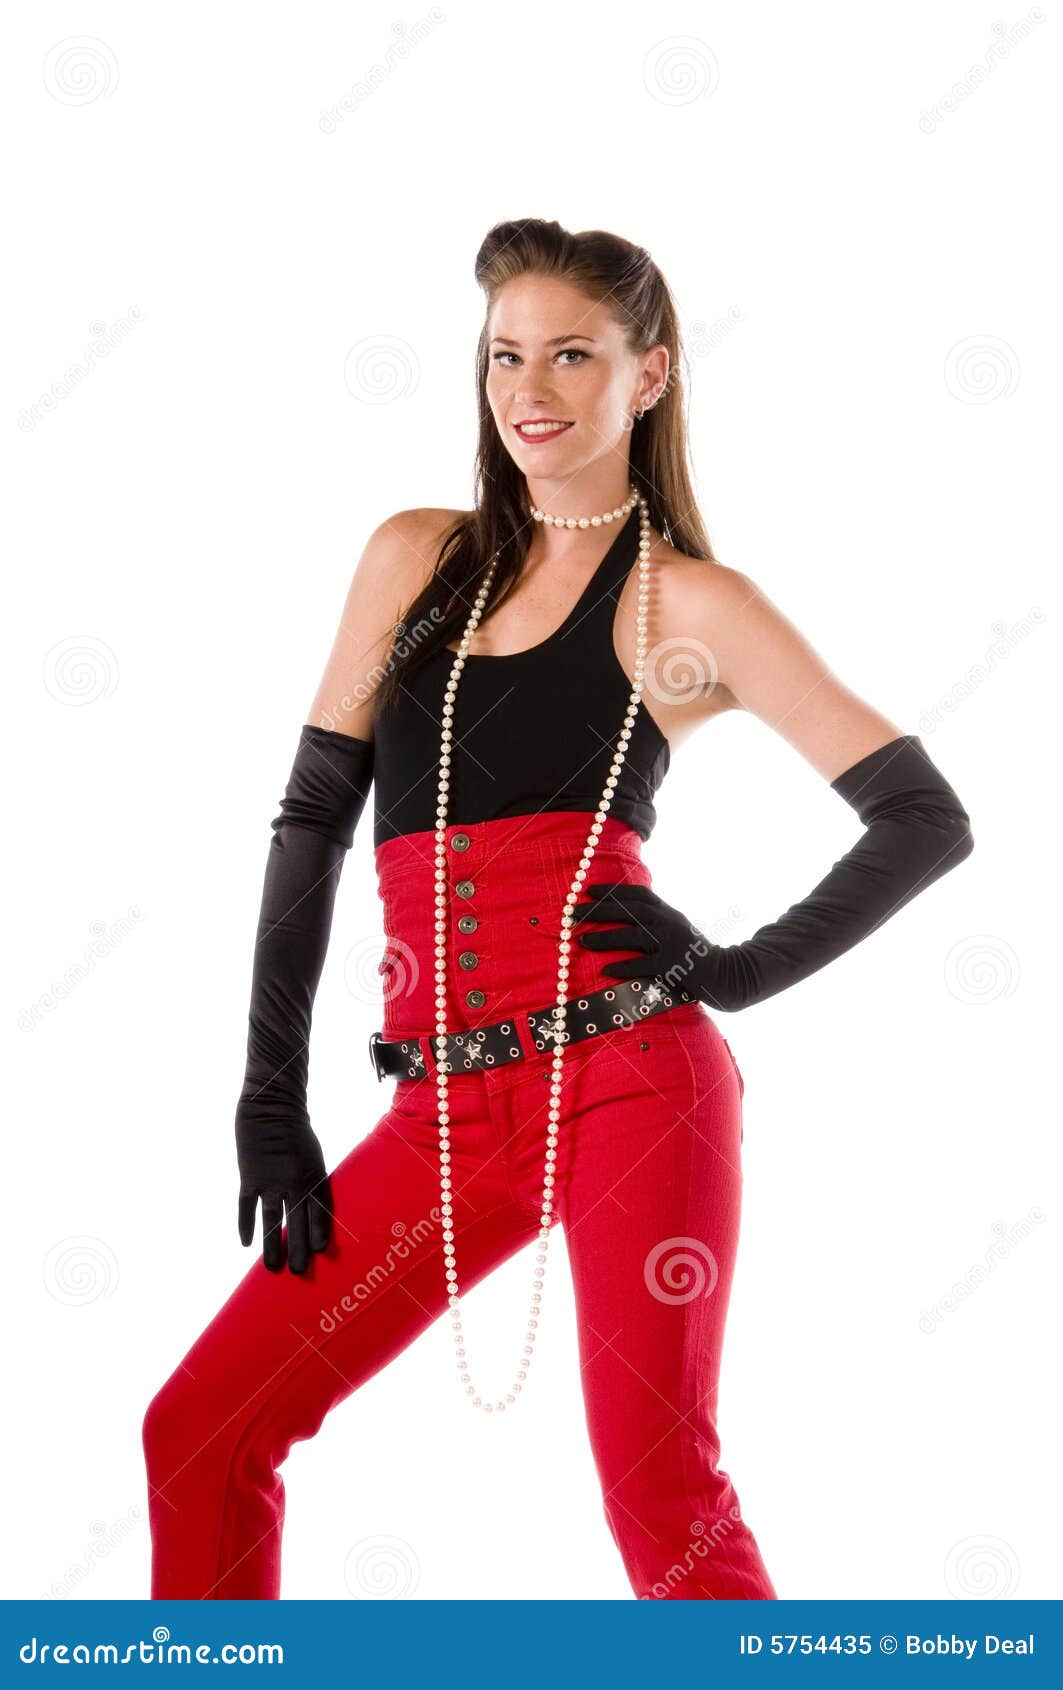 Pin Up in Red Pants stock image. Image of white, belt - 5754435